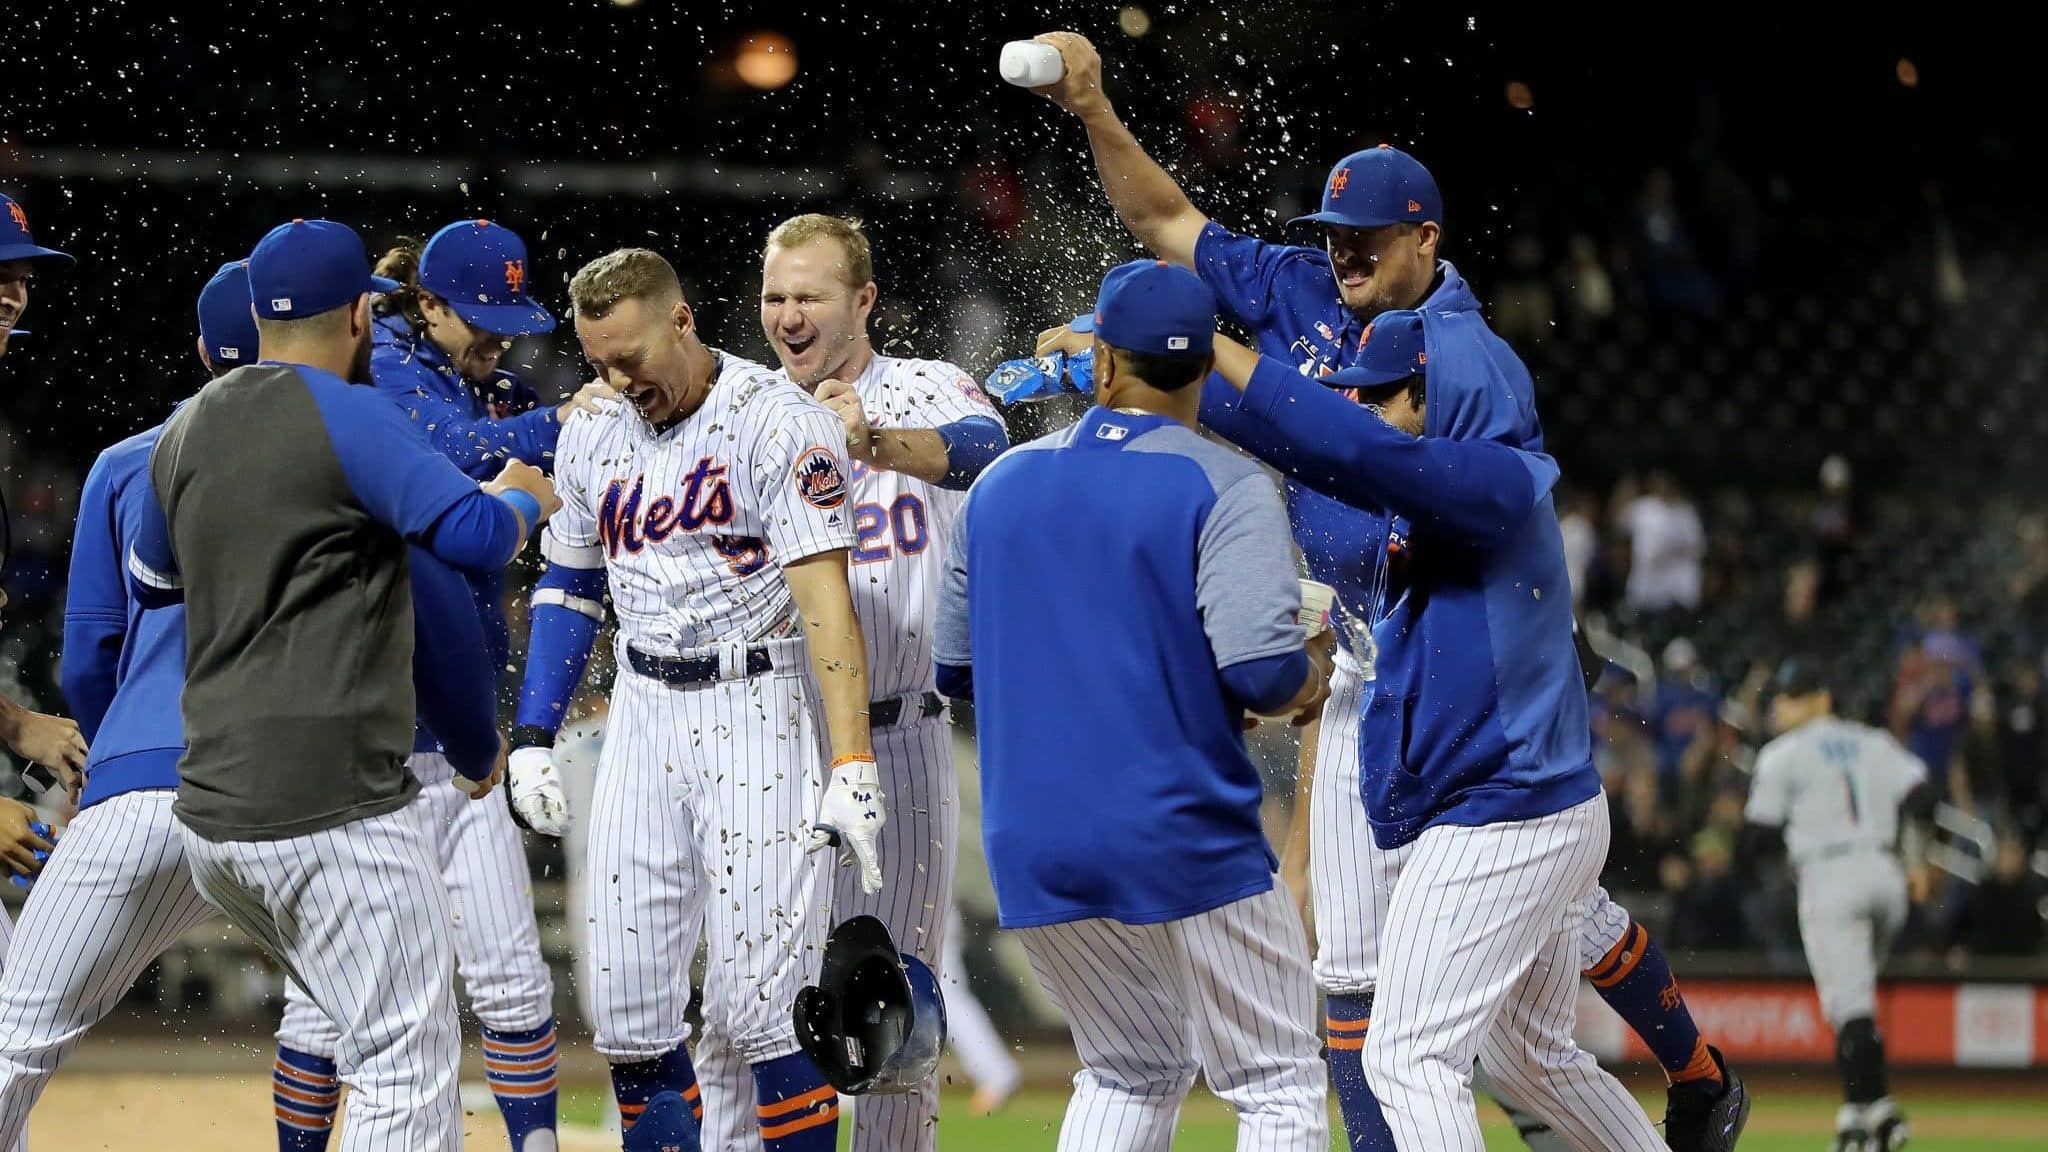 NEW YORK, NEW YORK - SEPTEMBER 24: Brandon Nimmo #9 of the New York Mets is congratulated by teammates as Pete Alonso #20 pulls at his jersey after Nimmo scored the game winning run with a bases loaded walk at Citi Field on September 24, 2019 in the Flushing neighborhood of the Queens borough of New York City.The New York Mets defeated the Miami Marlins 5-4 in 11 innings.